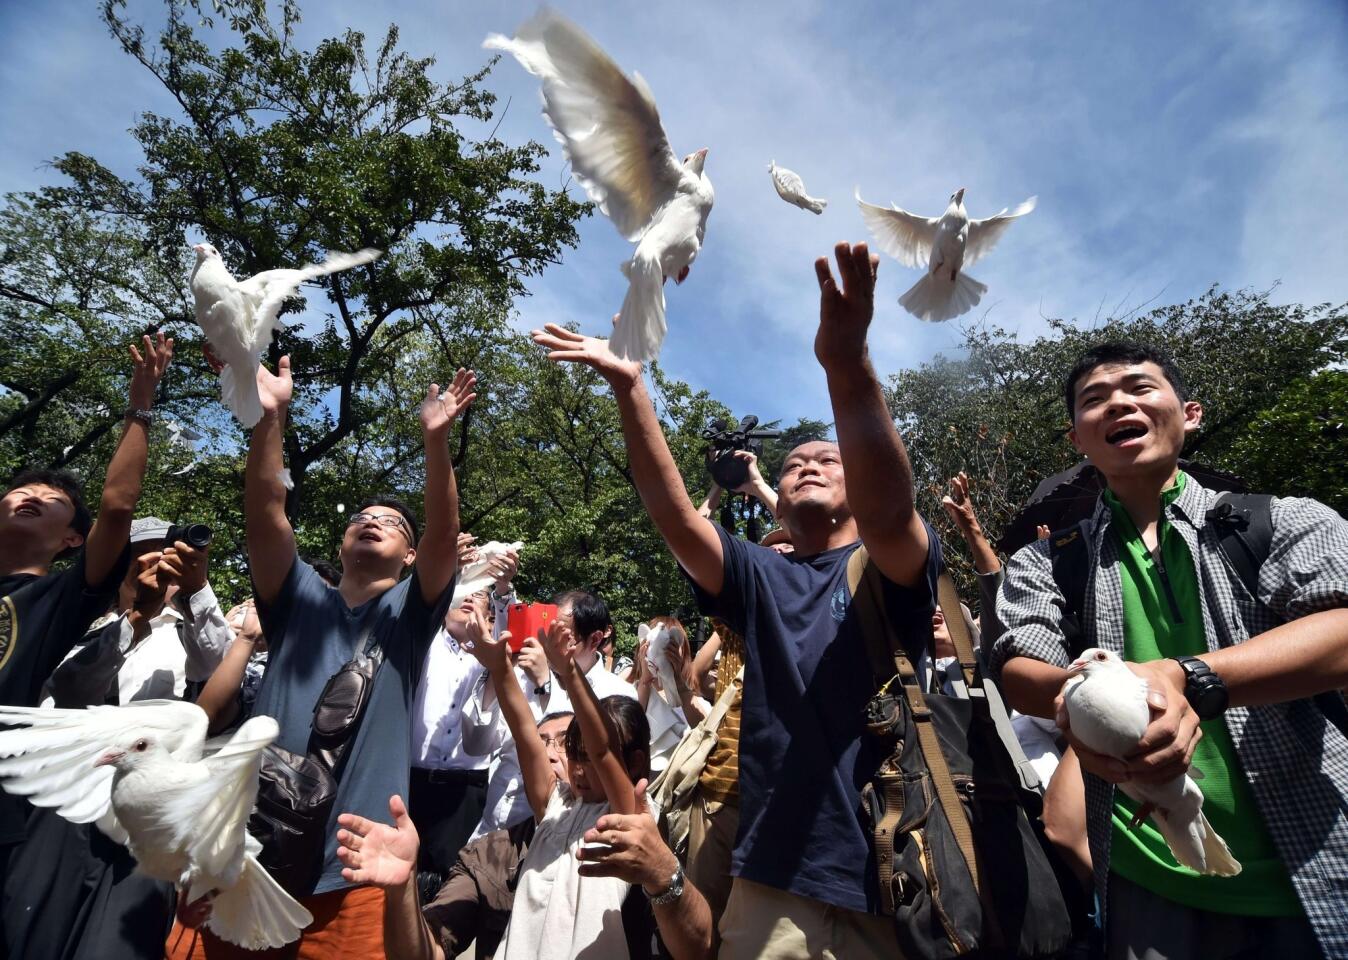 White doves are released during an Aug. 15 ceremony at Tokyo's Yasukuni shrine as Japan marks the 69th anniversary of its surrender in World War II.